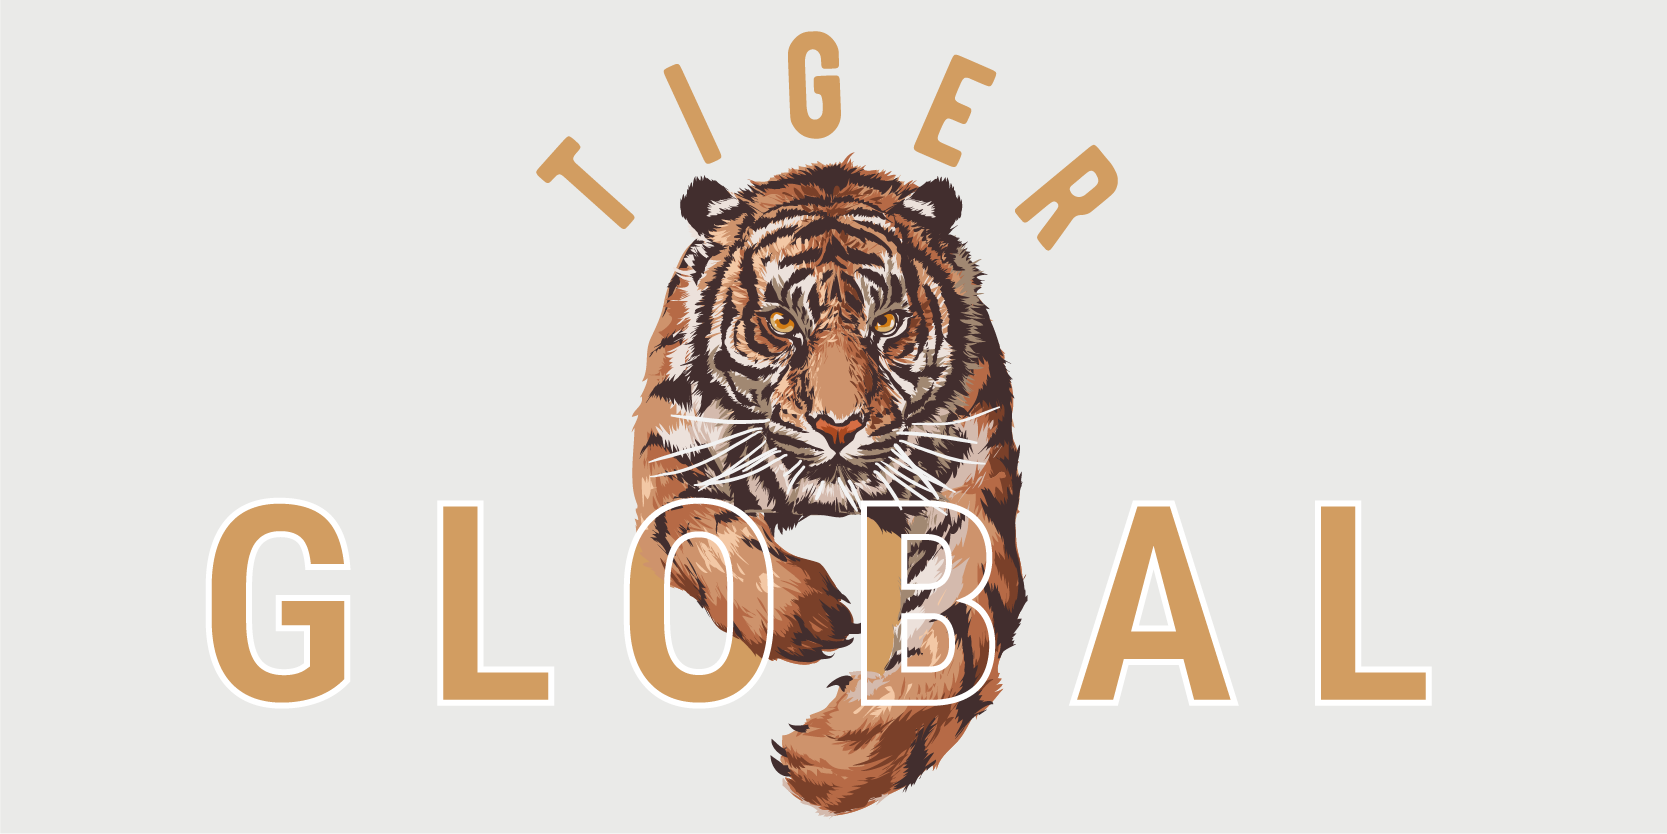 tiger global looks to raise $6 billion for next fund